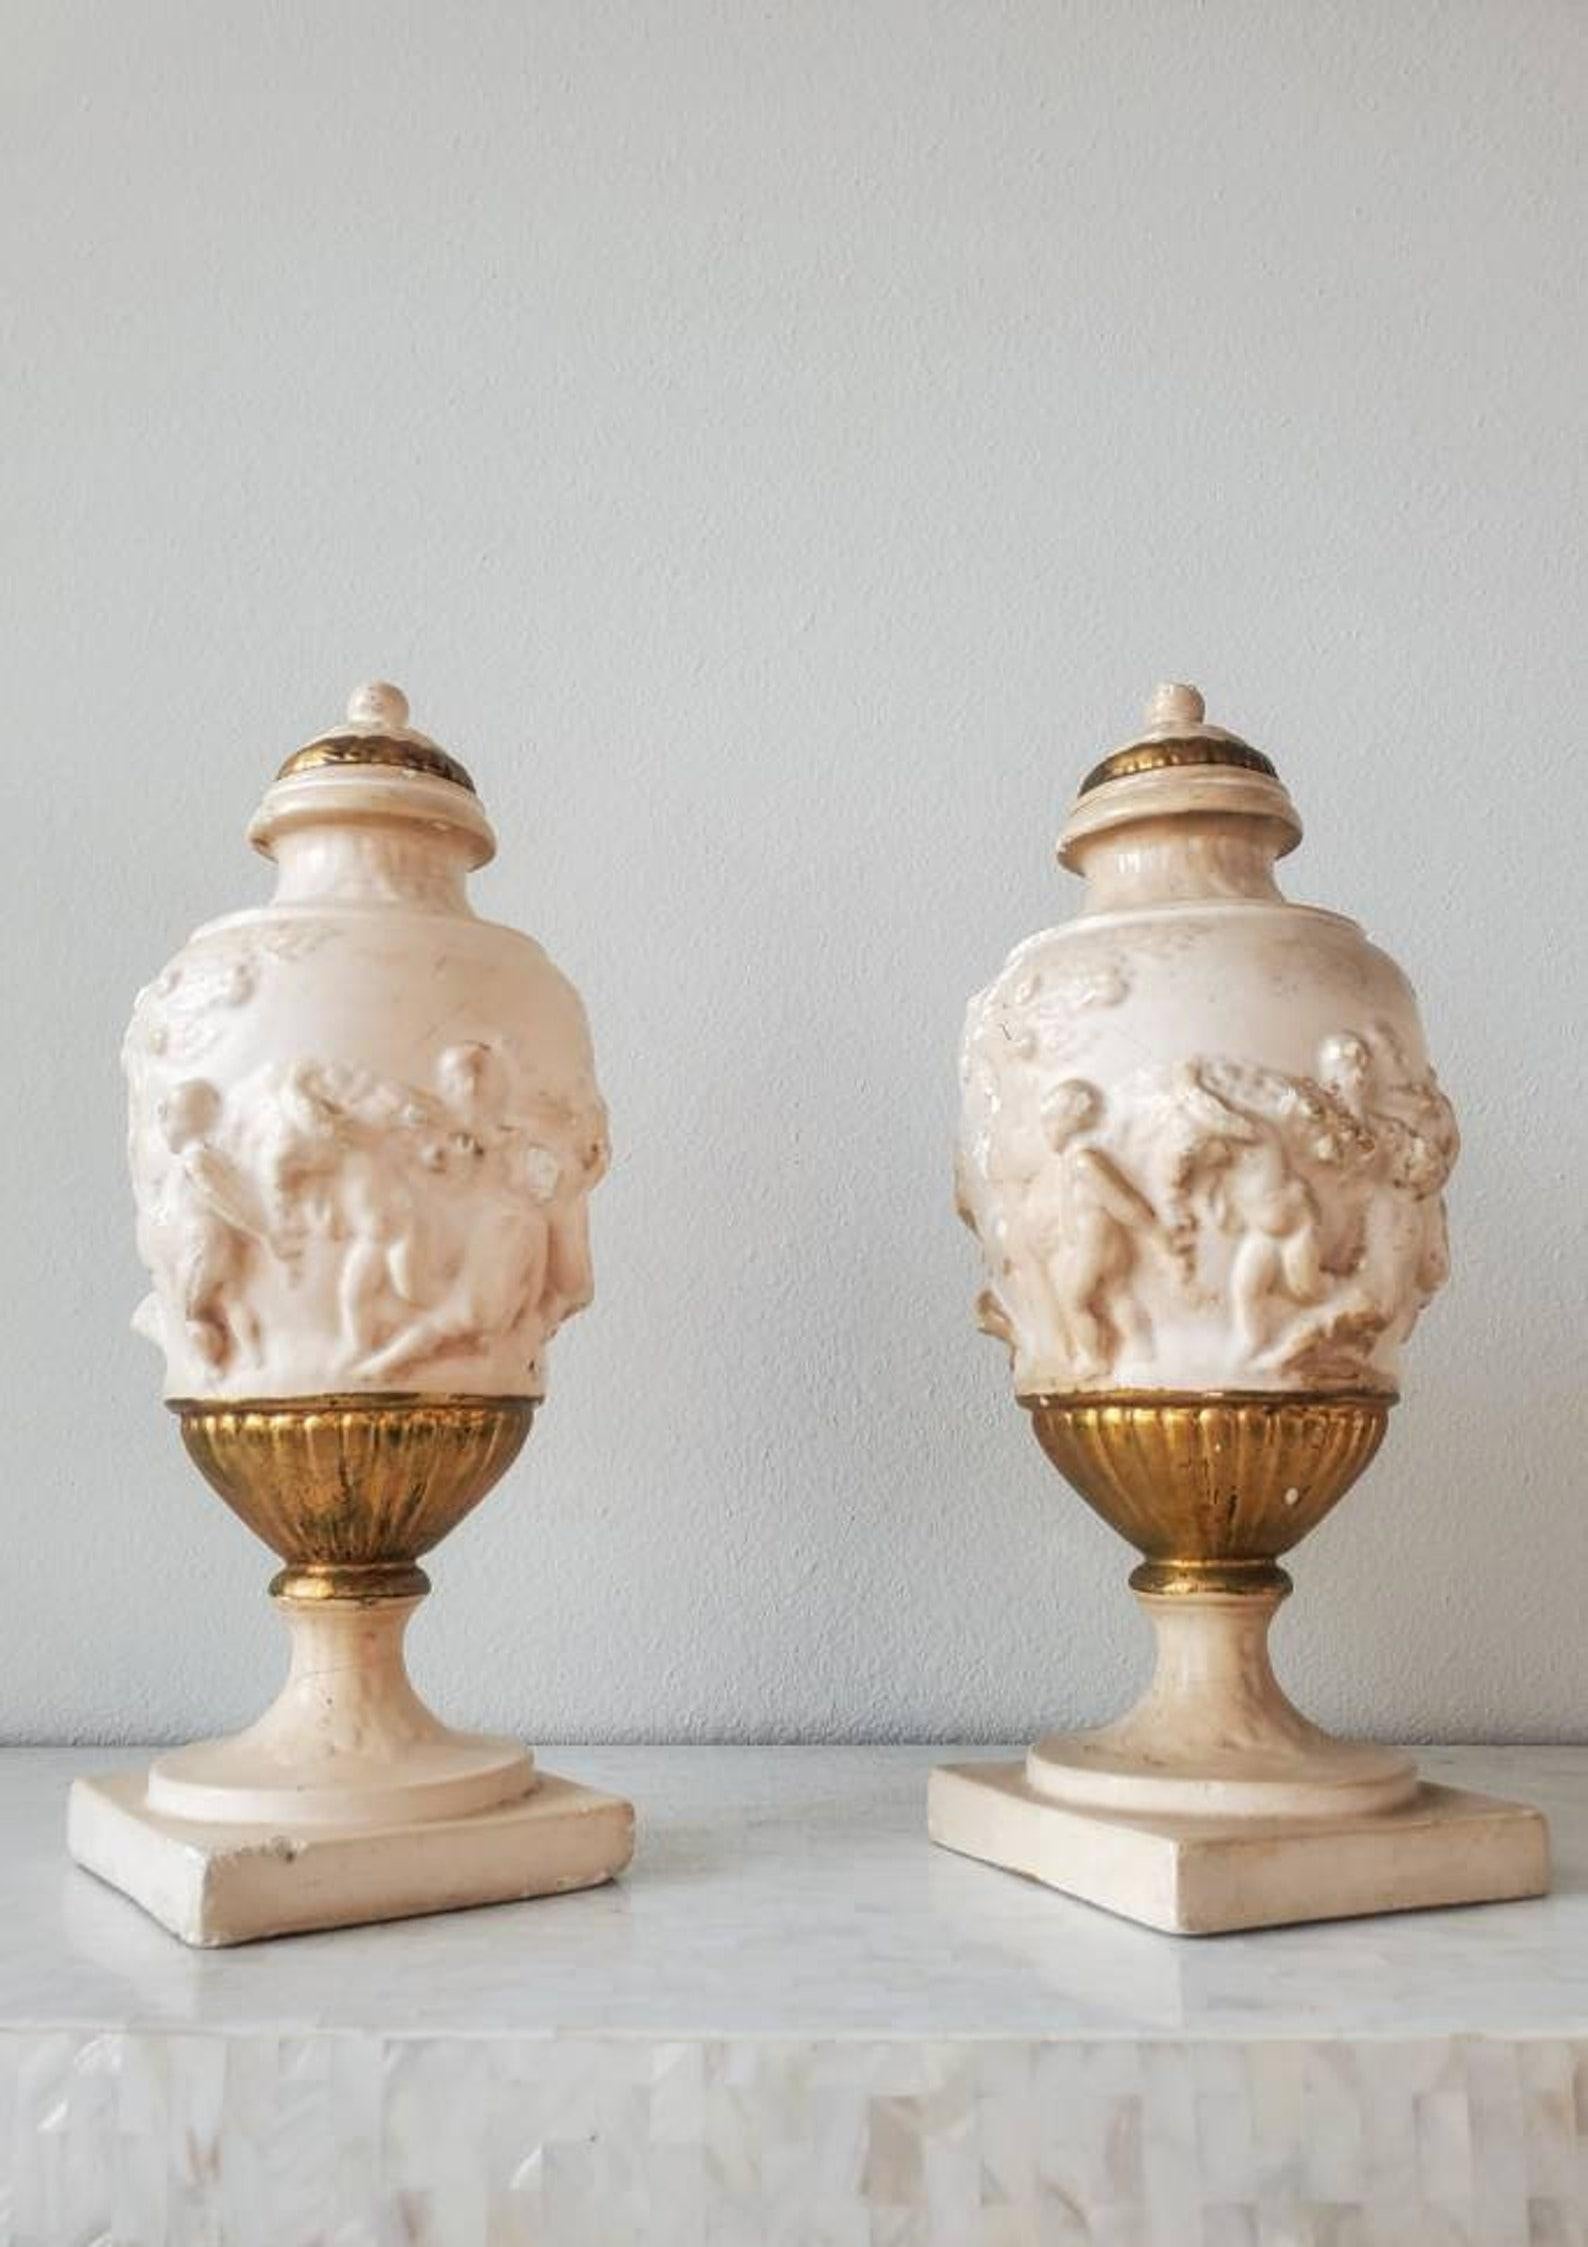 Giltwood Pair of Antique Italian Neoclassical Relief Carved Gilt Wood Decorative Urns For Sale